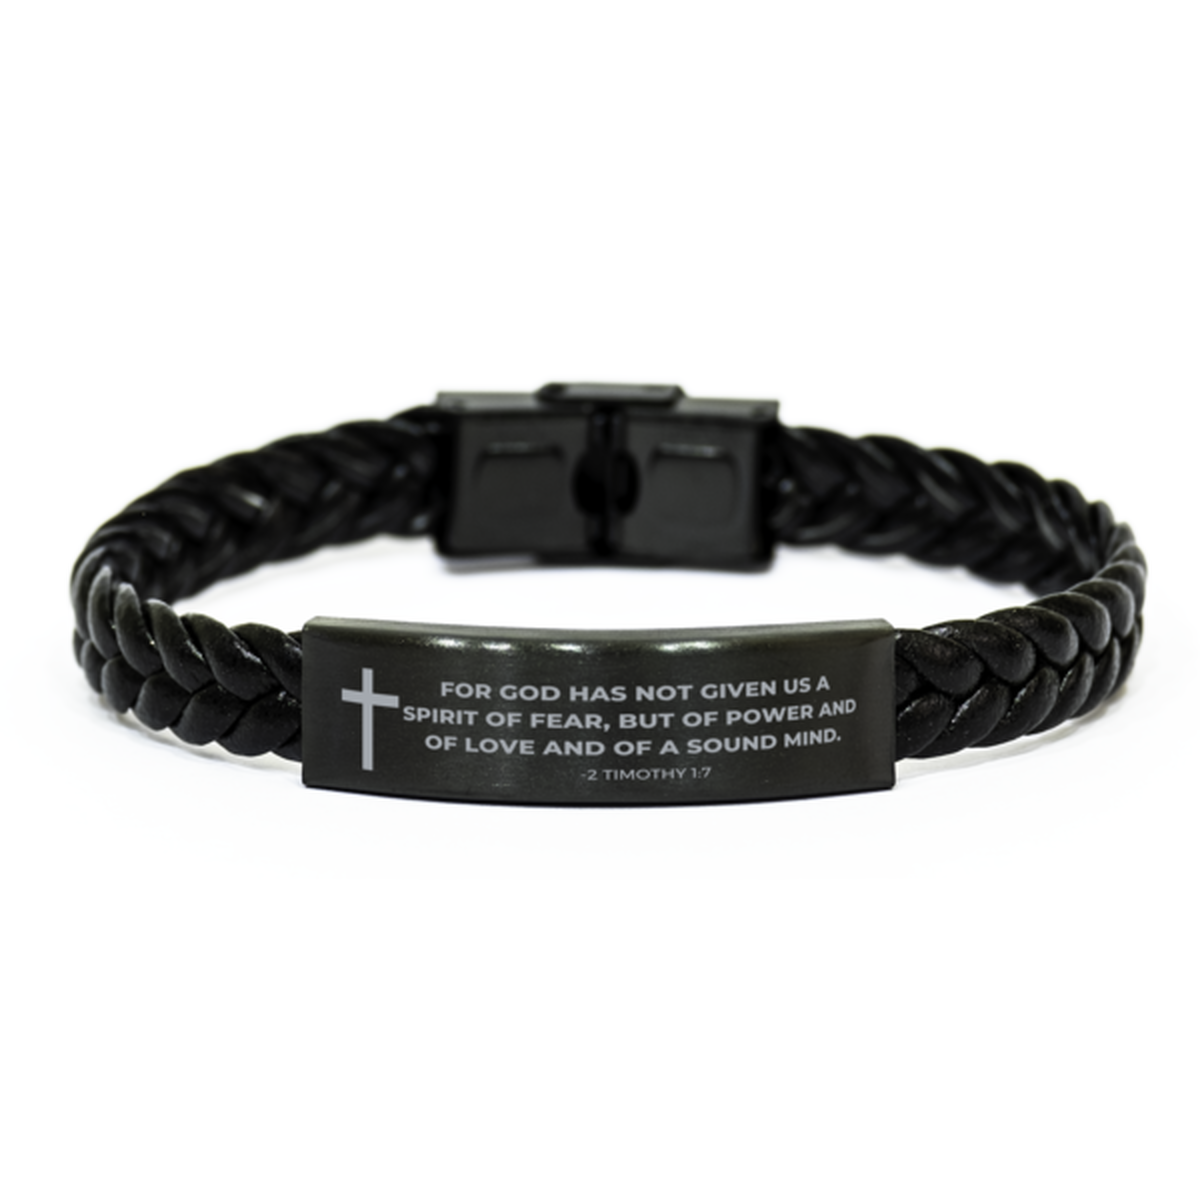 Baptism Gifts For Teenage Boys Girls, Christian Bible Verse Braided Leather Bracelet, For God has not given us, Catholic Confirmation Gifts for Son, Godson, Grandson, Nephew